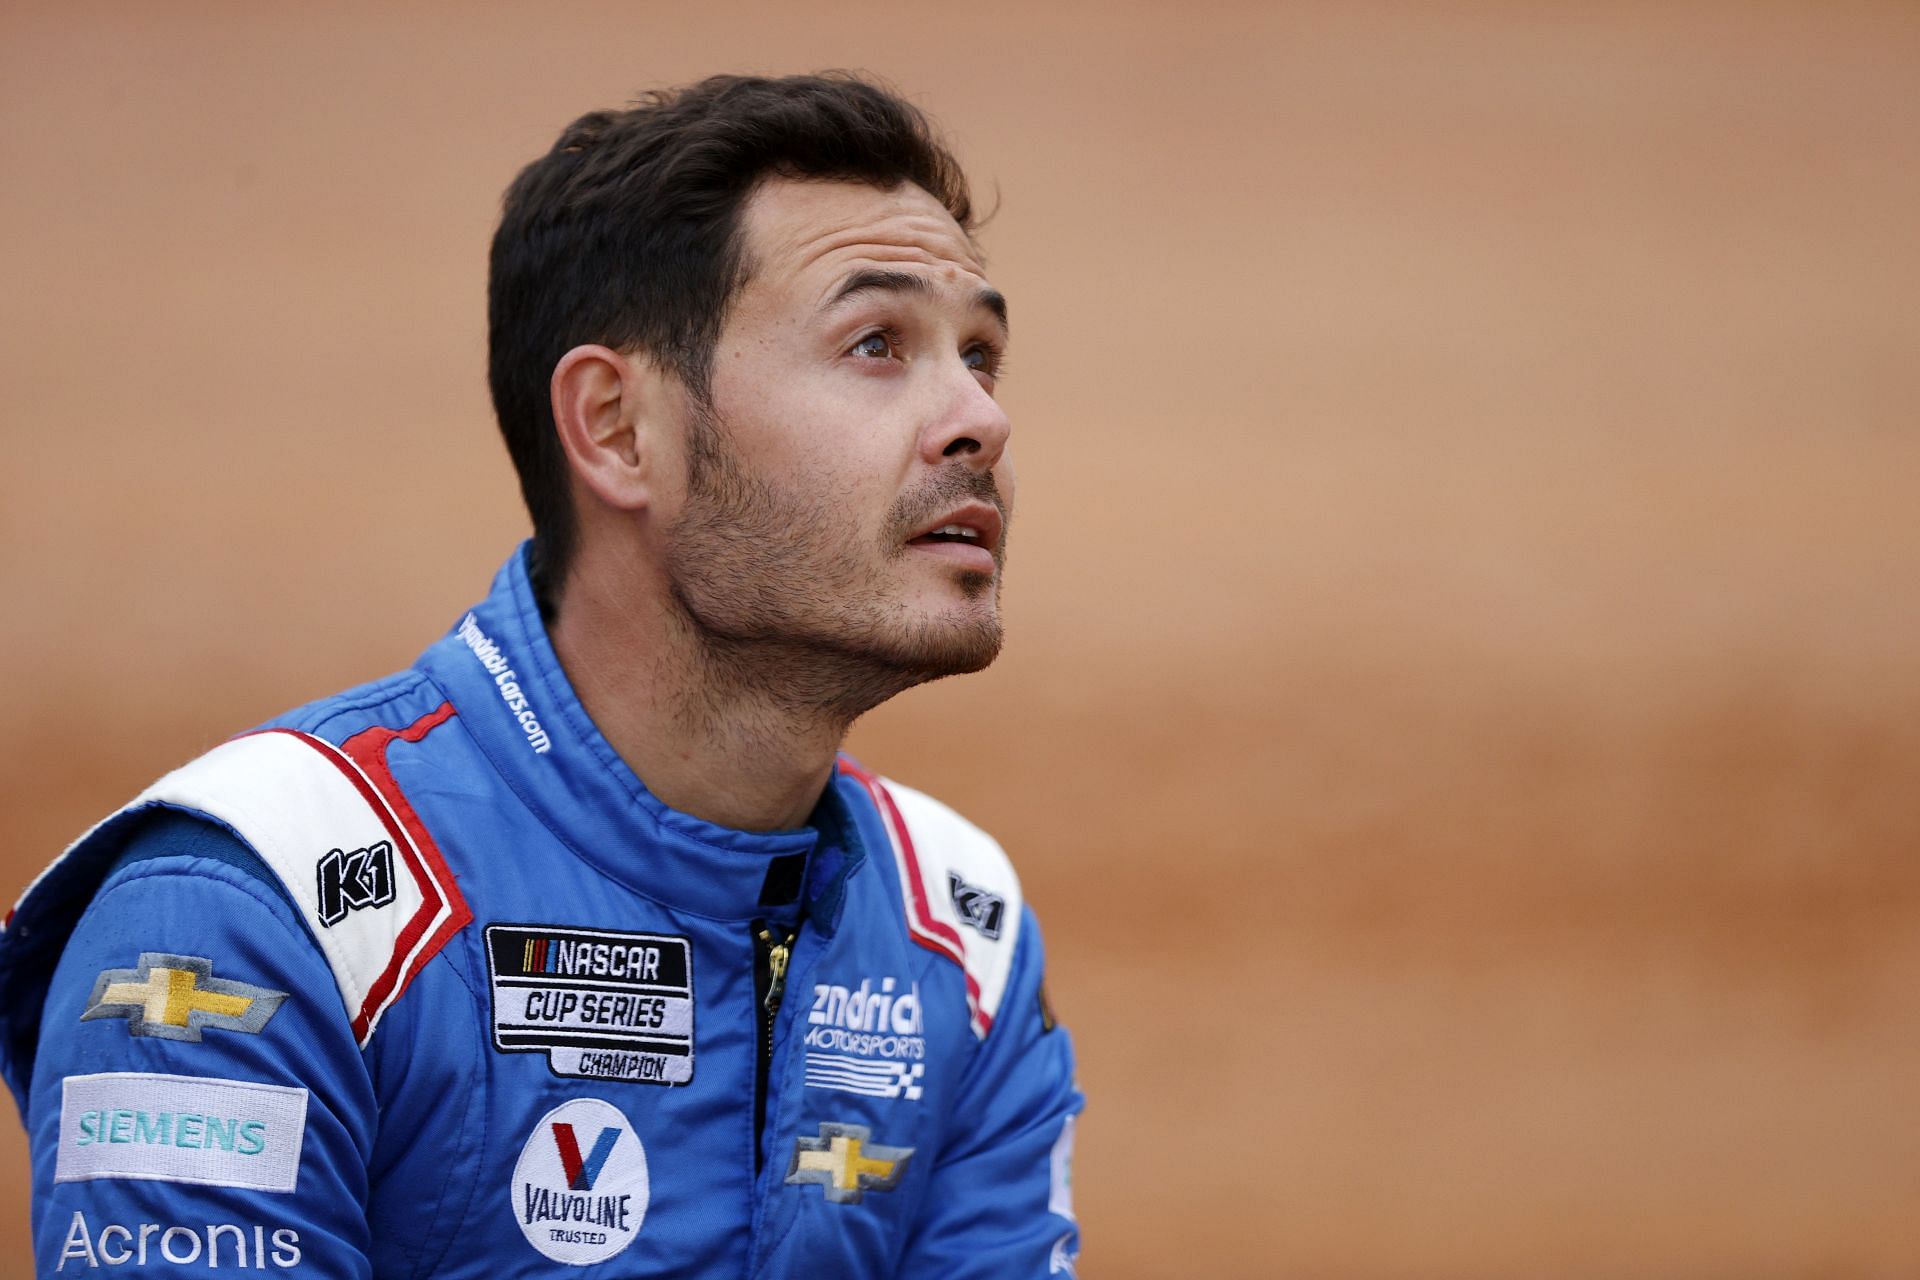 Kyle Larson before the 2022 NASCAR Cup Series Food City Dirt Race at Bristol Motor Speedway in Tennessee (Photo by Chris Graythen/Getty Images)